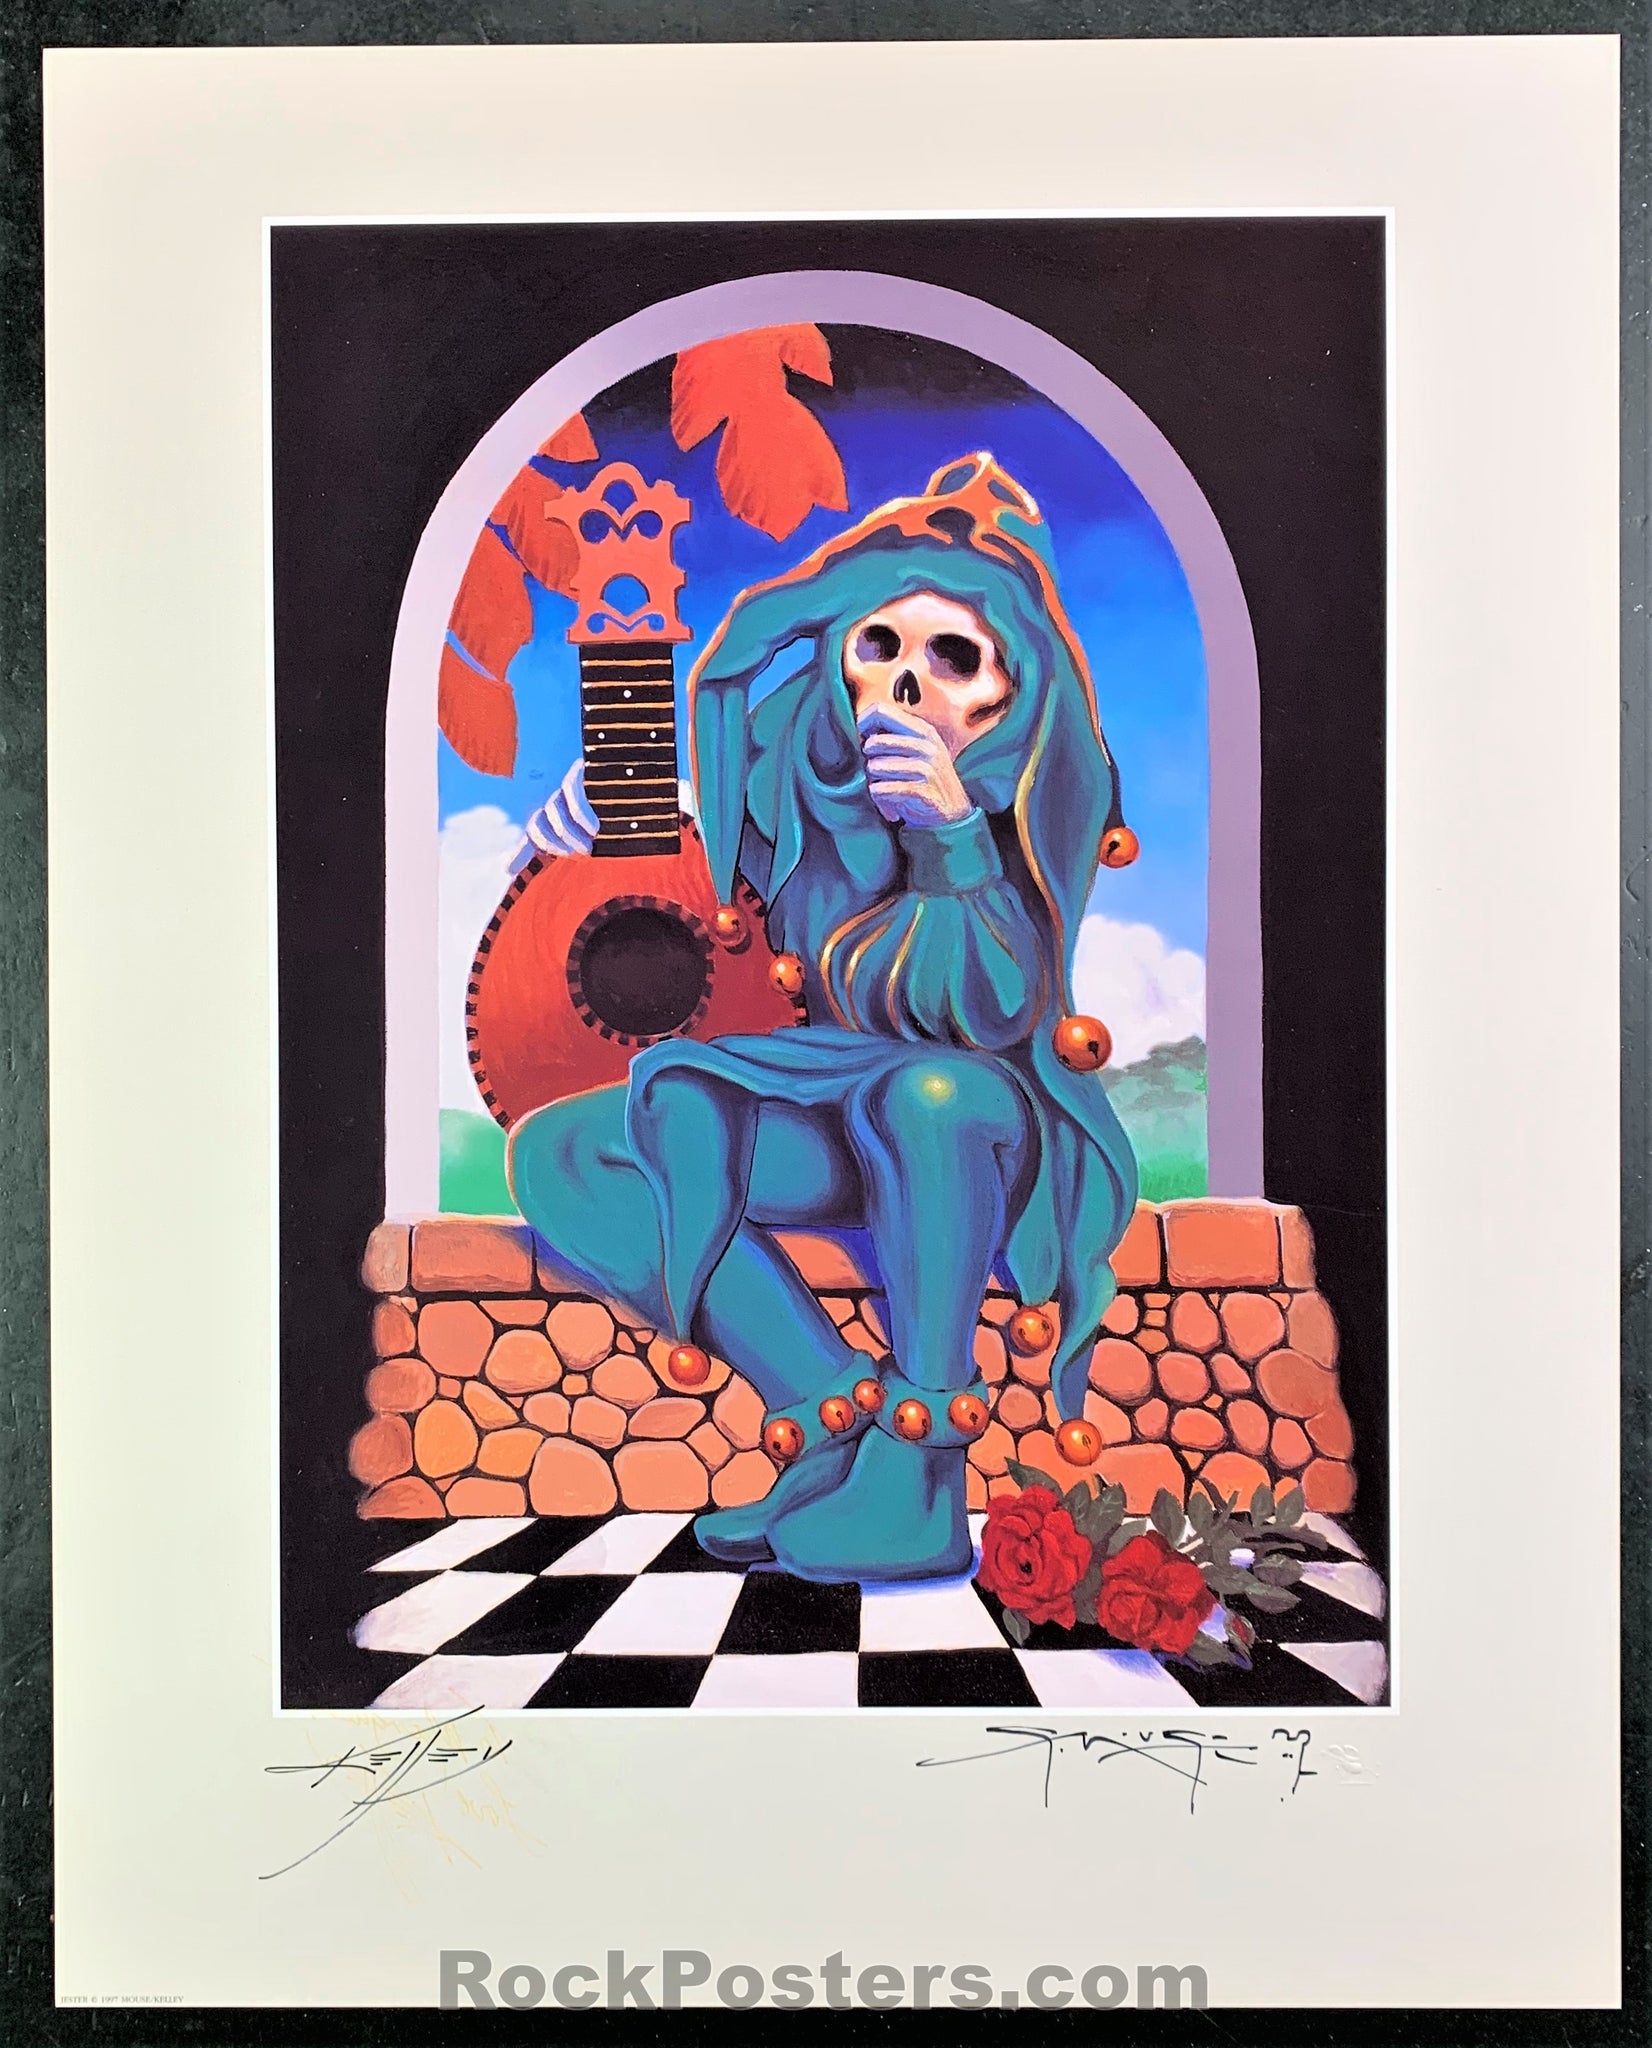 AUCTION - Grateful Dead - The Jester - Mouse Kelley Double Signed Poster - Mint